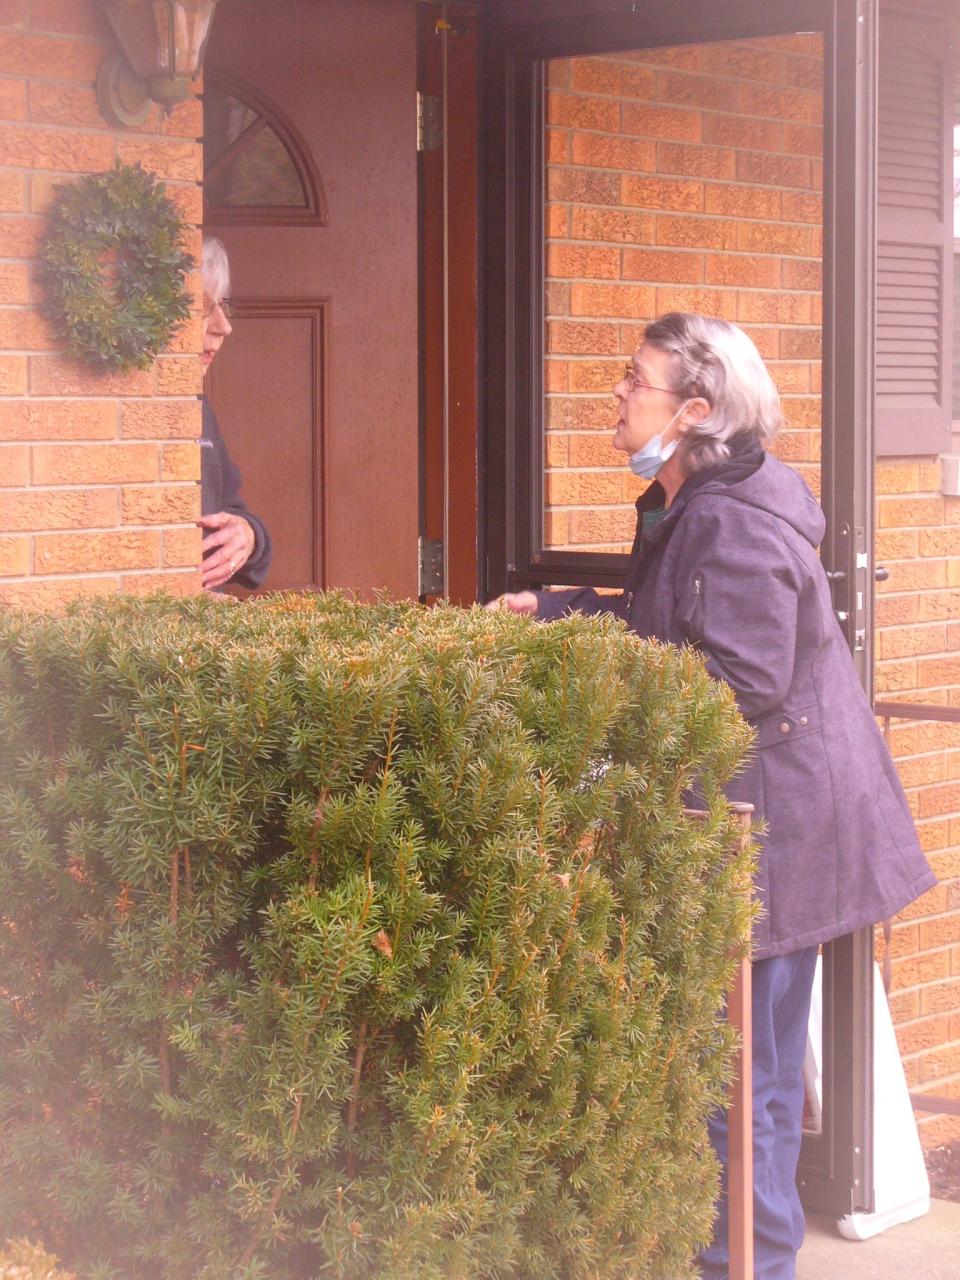 Pat Winter speaks to a client while making the midday delivery along a Meals on Wheels route on the south side of Bloomington.